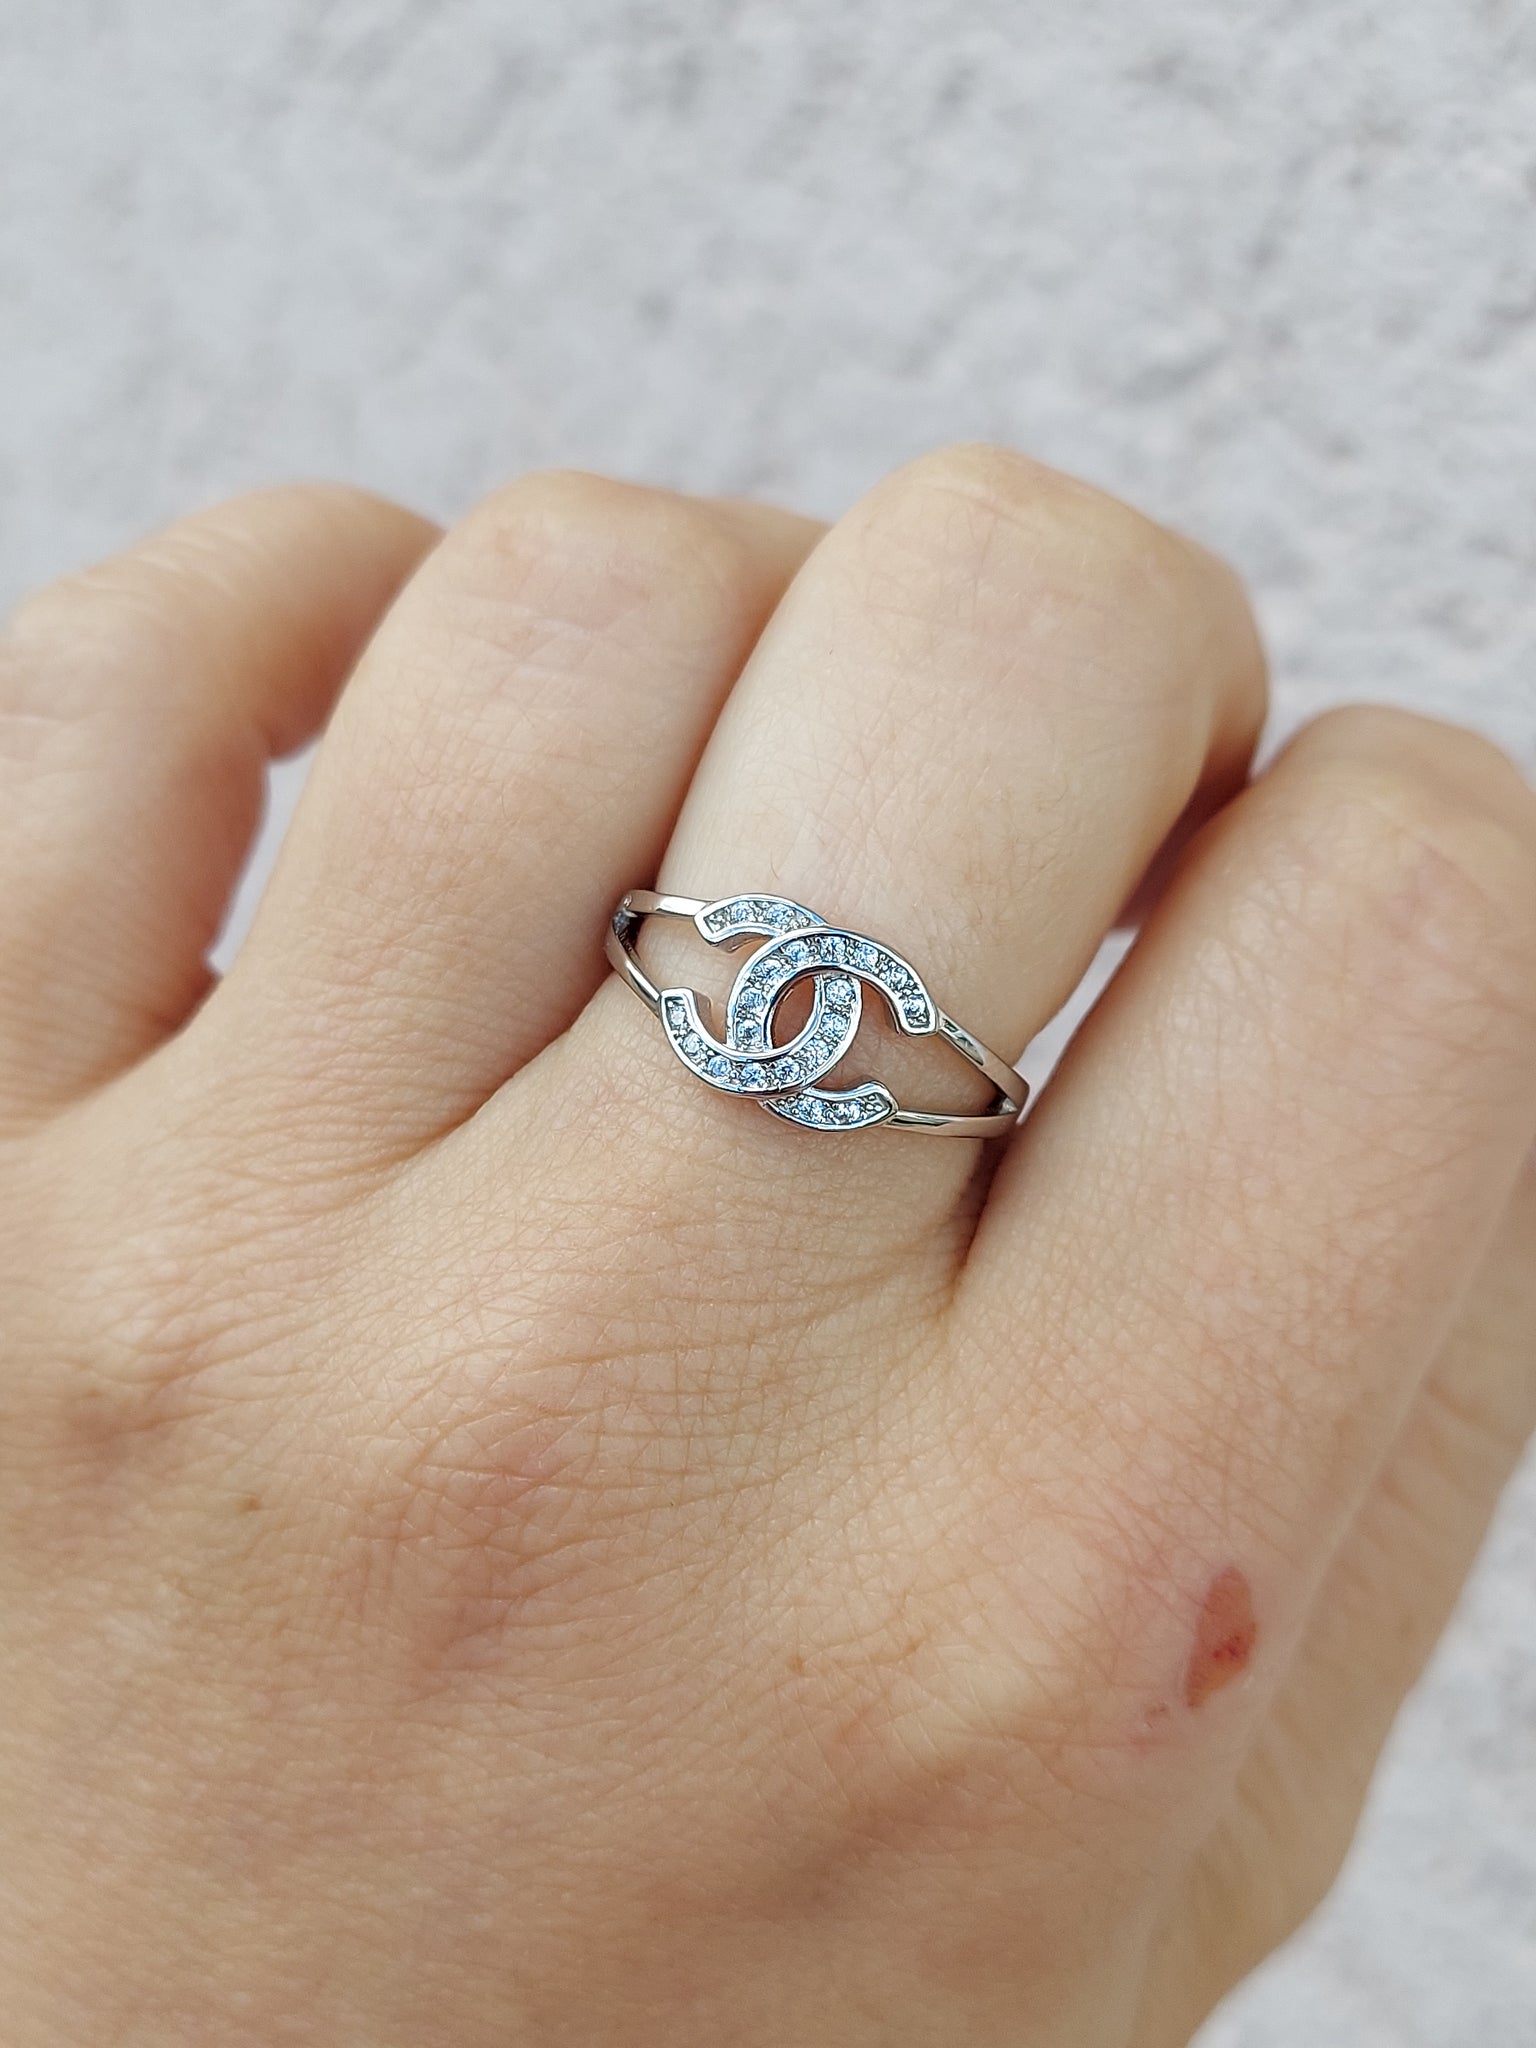 Designer Inspired CC Ring - Sterling Silver – Marie's Jewelry Store